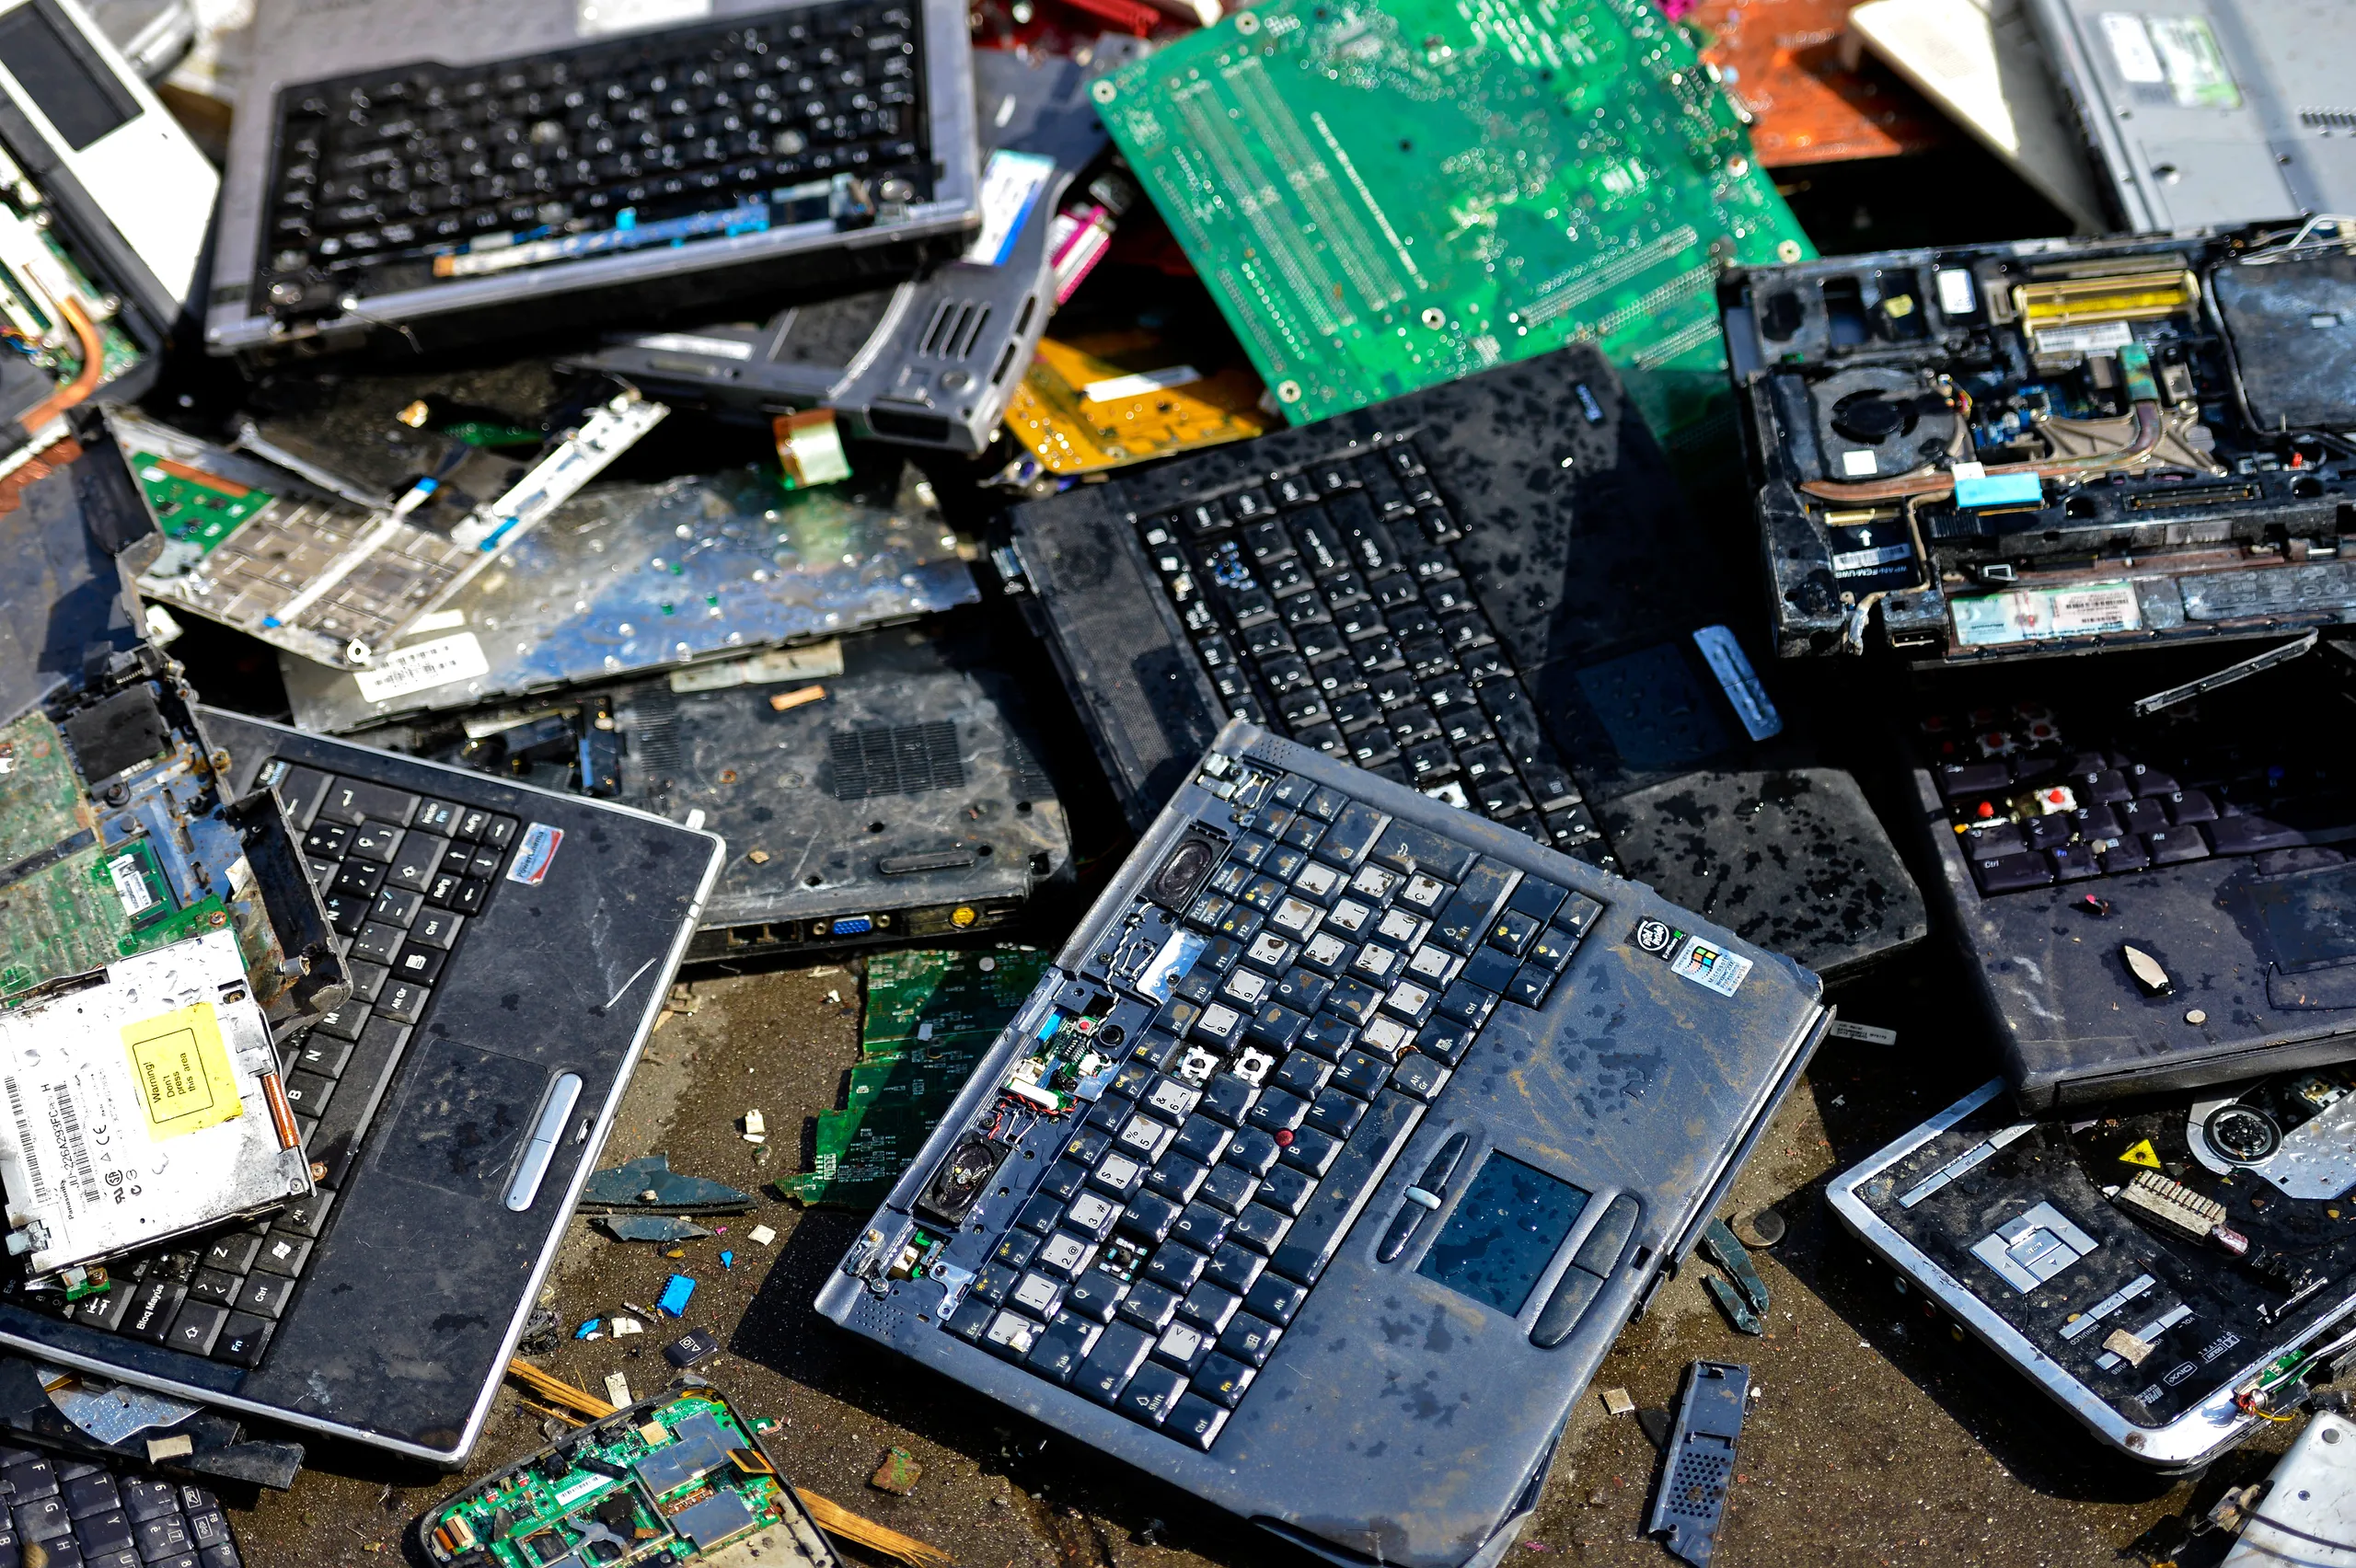 How improper disposal of electronic gadgets